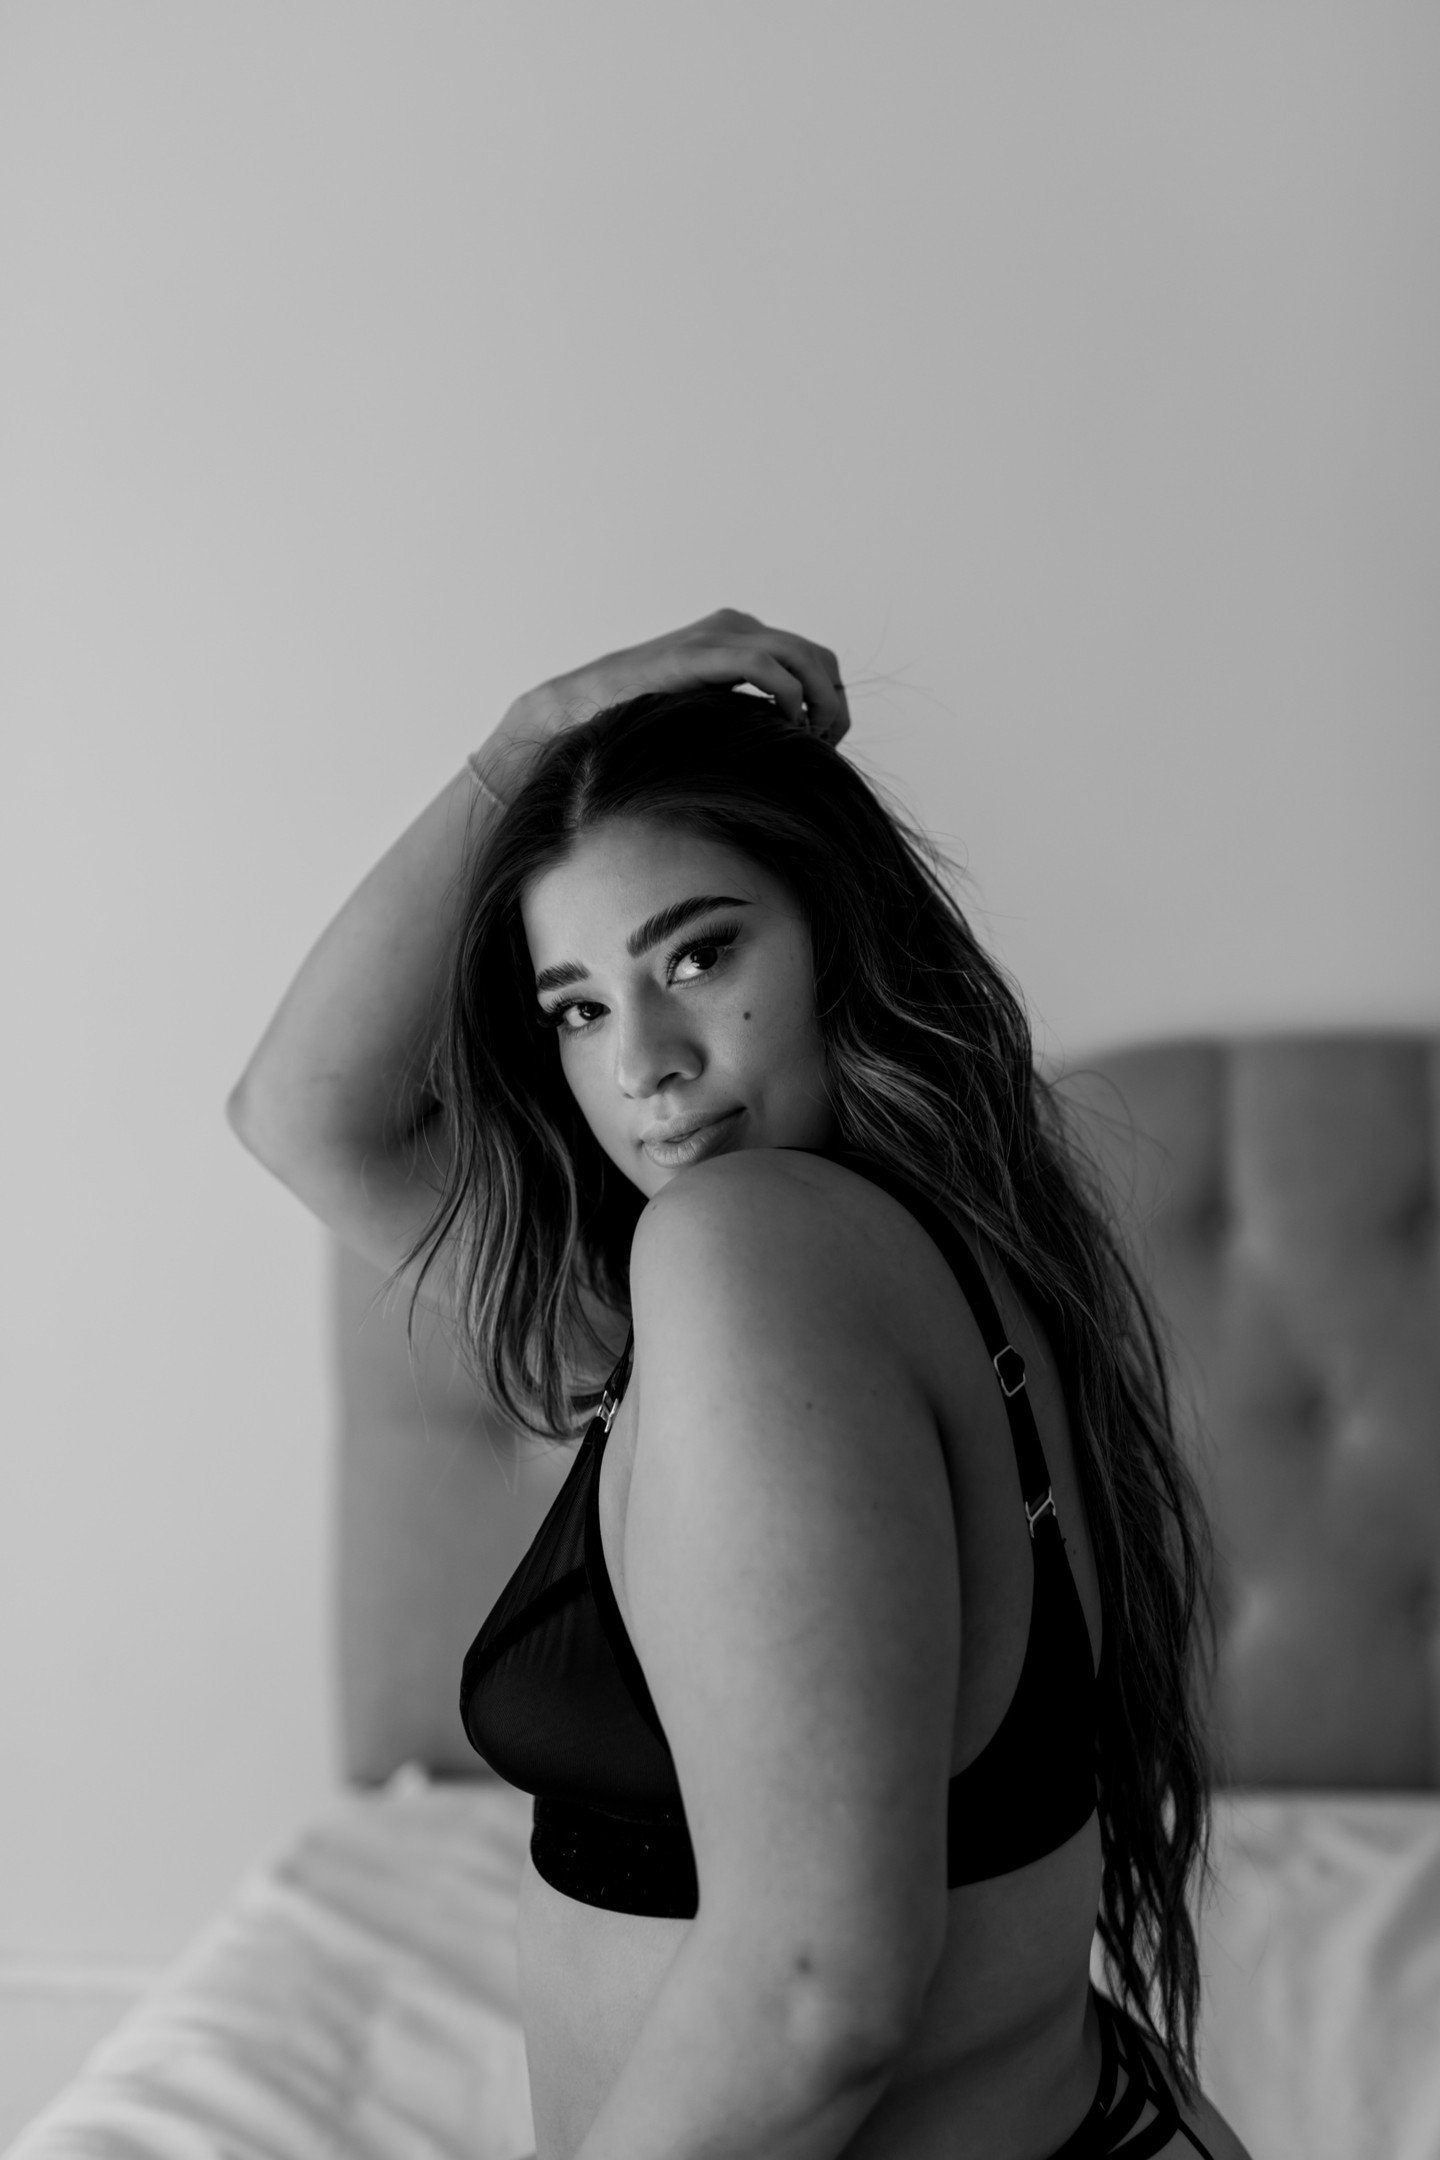 For you.

For him. 

For both of you. 

For now. 

For later.

Forever. 

Boudoir shoots empower you in a way you cannot even imagine until you get into the studio. 

You get into hair and makeup, you slip on barely-there ensemble that makes you feel